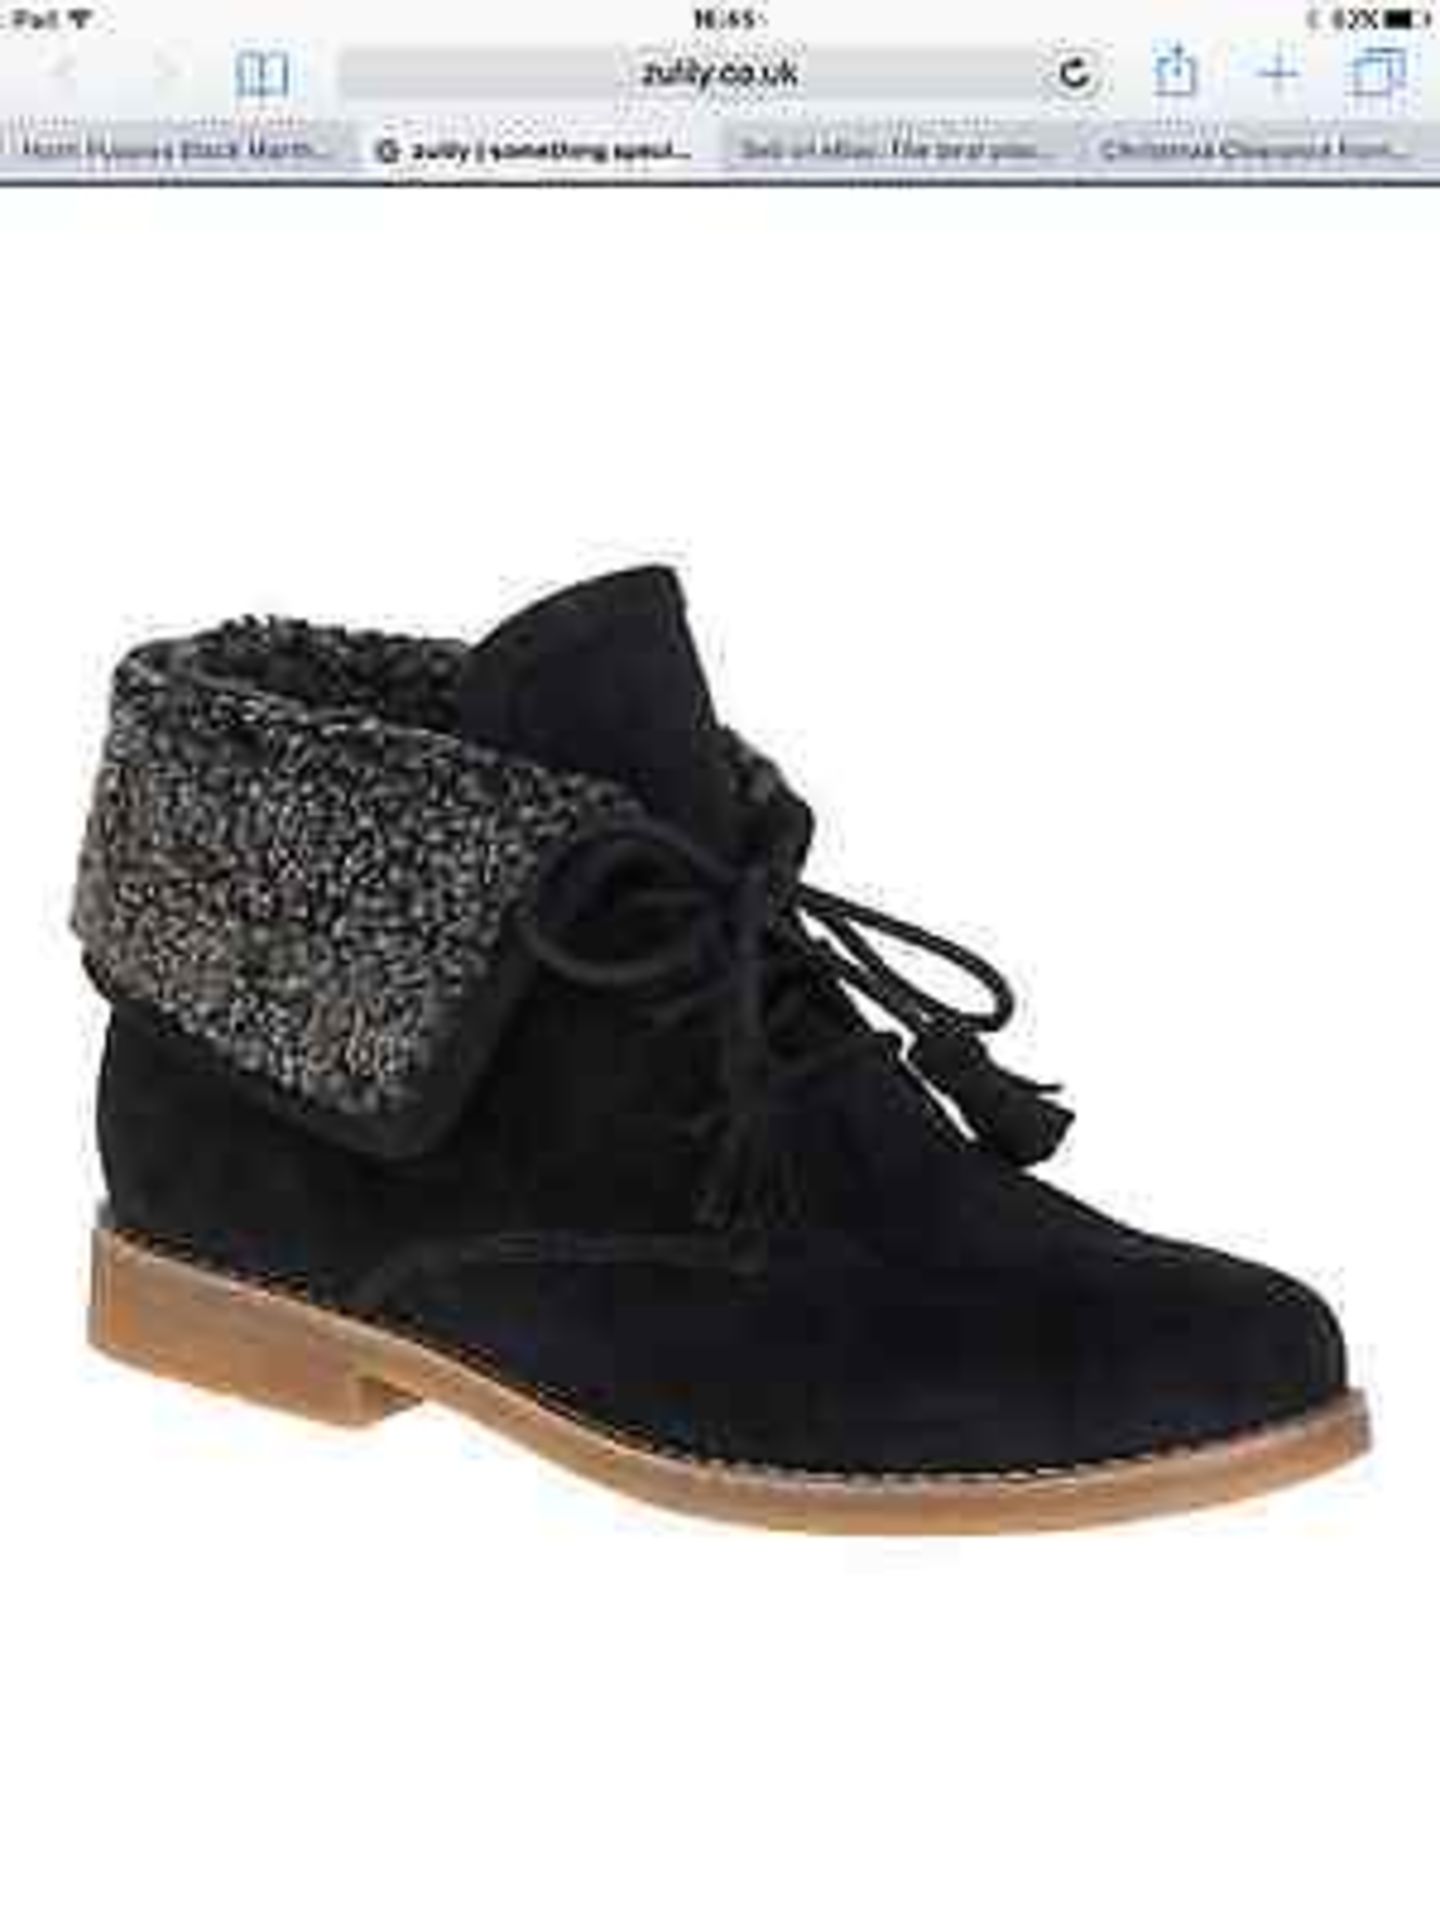 Hush Puppies Black Suede Martha Cayto Ankle Boot, Size UK 7, RRP £100 (New with box) [Ref: ]